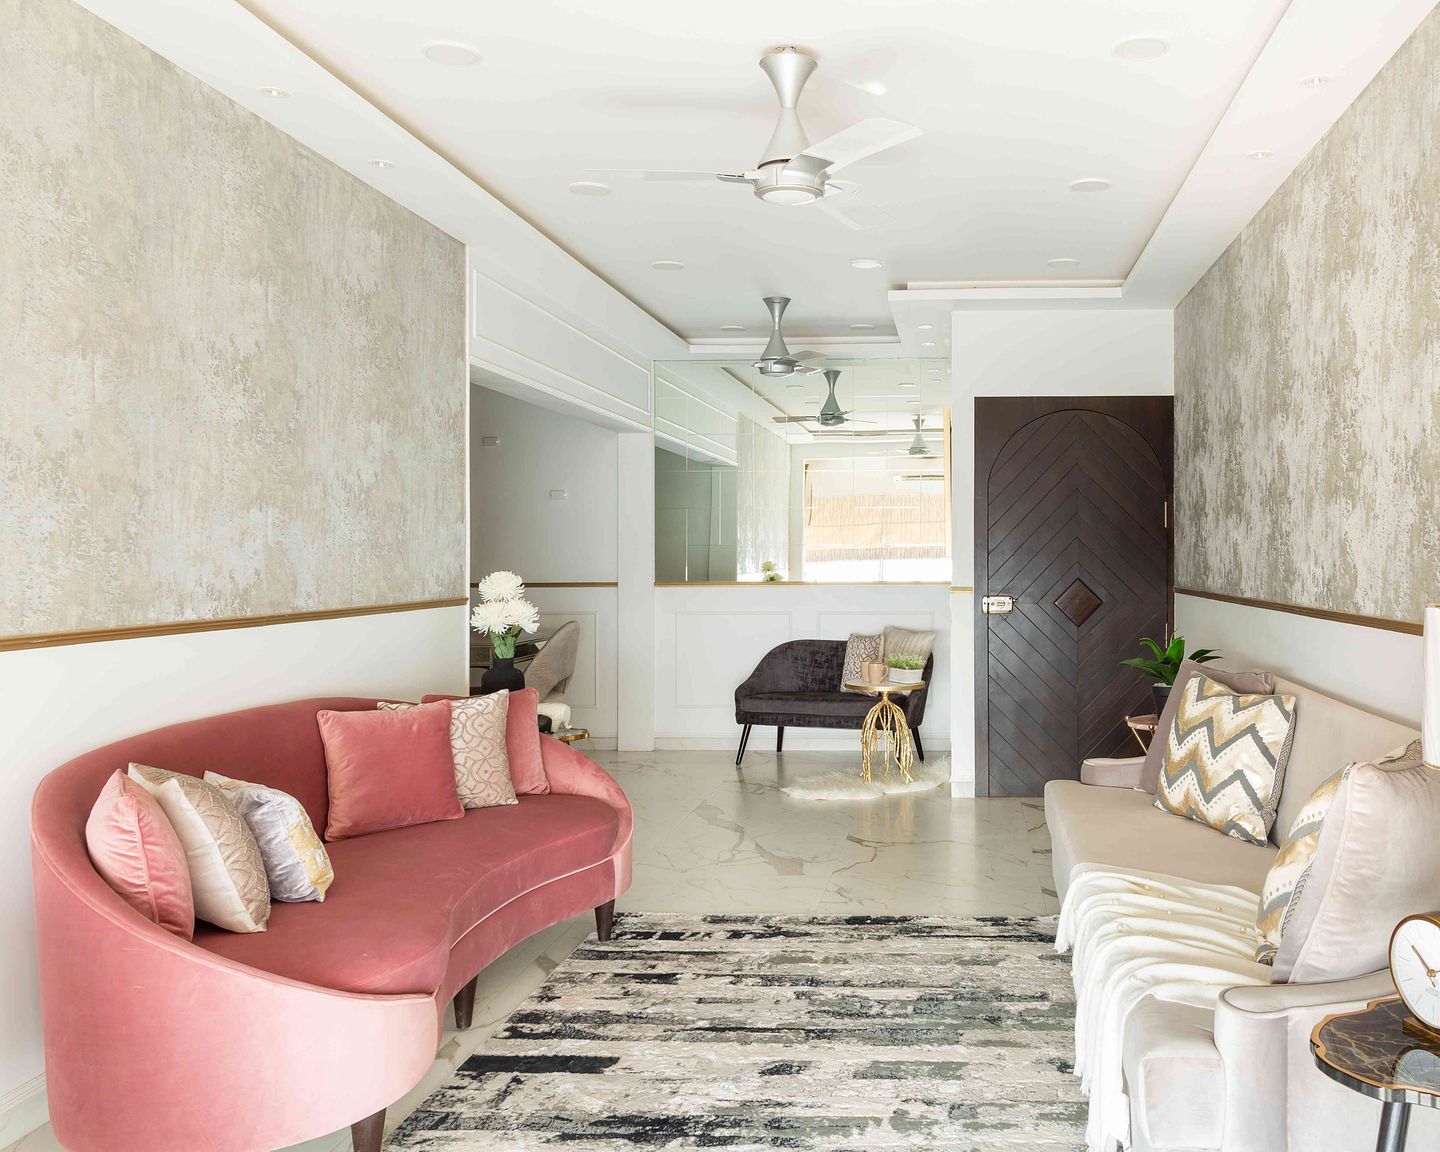 False Ceiling With Contrasting Pink Shade - Livspace